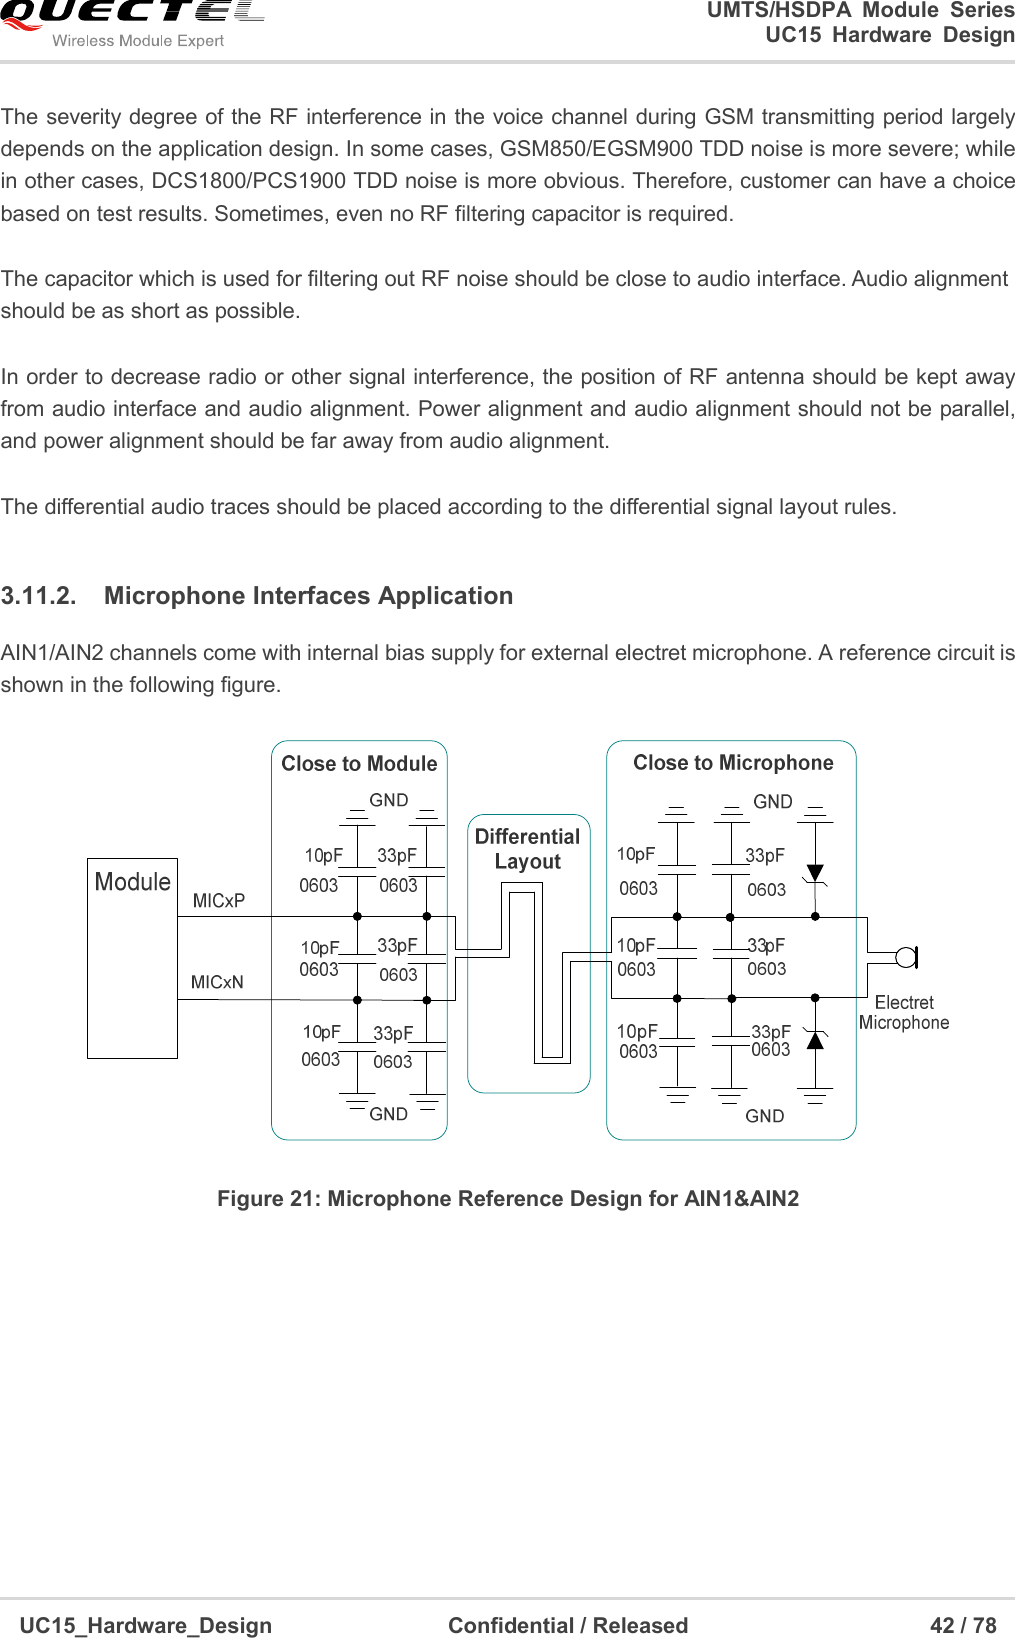                                                                        UMTS/HSDPA  Module  Series                                                                 UC15 Hardware Design  UC15_Hardware_Design                                Confidential / Released                                            42 / 78    The severity degree of the RF interference in the voice channel during GSM transmitting period largely depends on the application design. In some cases, GSM850/EGSM900 TDD noise is more severe; while in other cases, DCS1800/PCS1900 TDD noise is more obvious. Therefore, customer can have a choice based on test results. Sometimes, even no RF filtering capacitor is required.  The capacitor which is used for filtering out RF noise should be close to audio interface. Audio alignment should be as short as possible.  In order to decrease radio or other signal interference, the position of RF antenna should be kept away from audio interface and audio alignment. Power alignment and audio alignment should not be parallel, and power alignment should be far away from audio alignment.  The differential audio traces should be placed according to the differential signal layout rules.    3.11.2.  Microphone Interfaces Application AIN1/AIN2 channels come with internal bias supply for external electret microphone. A reference circuit is shown in the following figure.    Figure 21: Microphone Reference Design for AIN1&amp;AIN2  